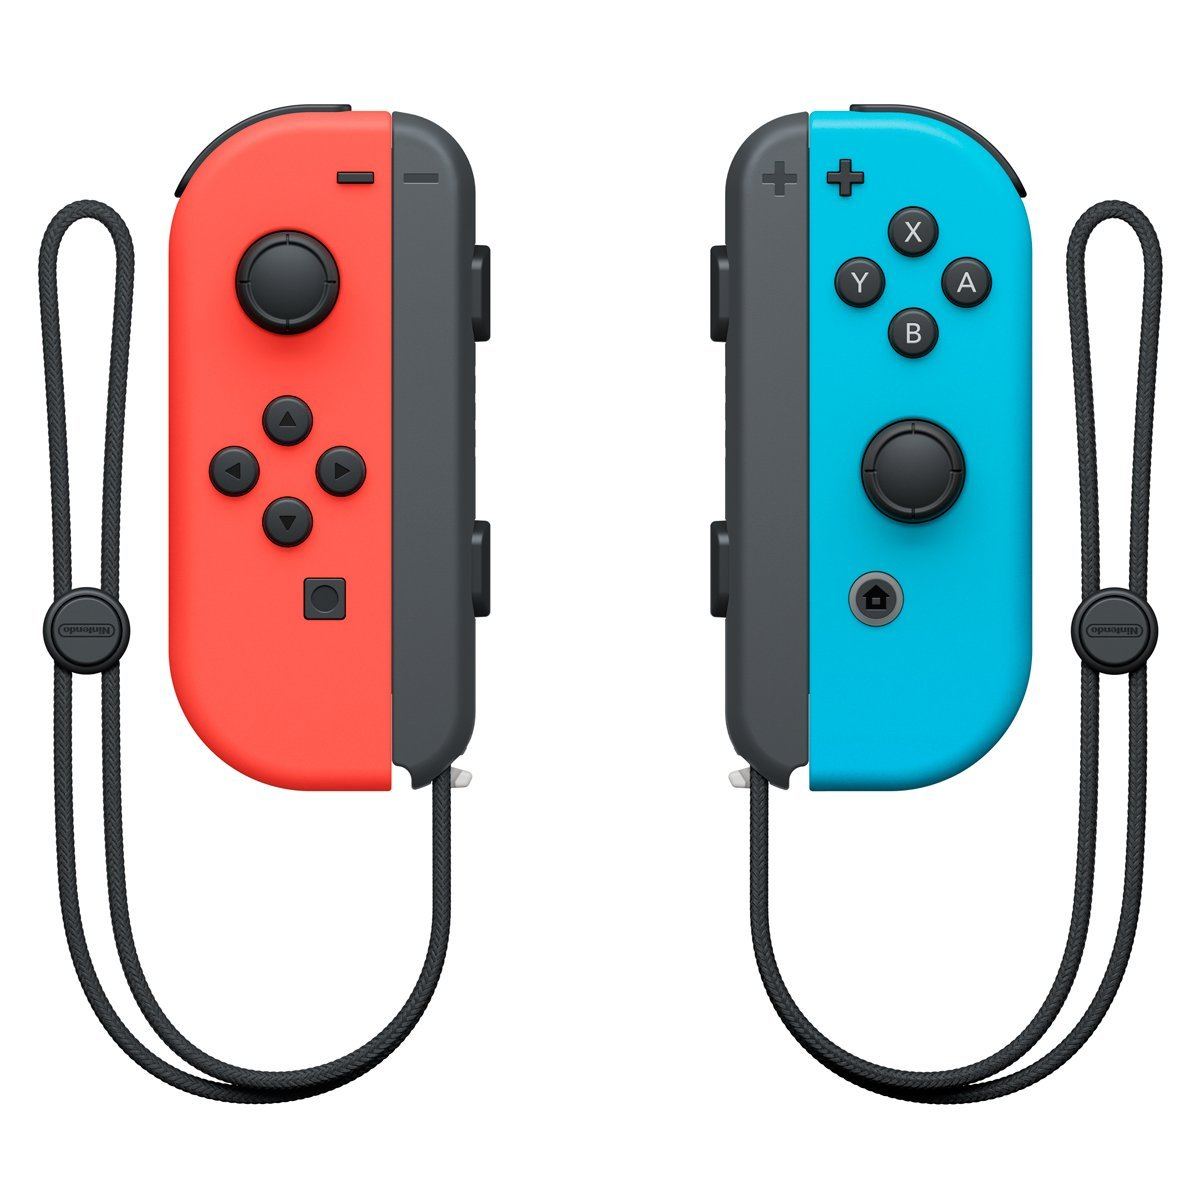 Nintendo Switch Joy-Con Controllers (Neon Red/ Neon Blue) for 